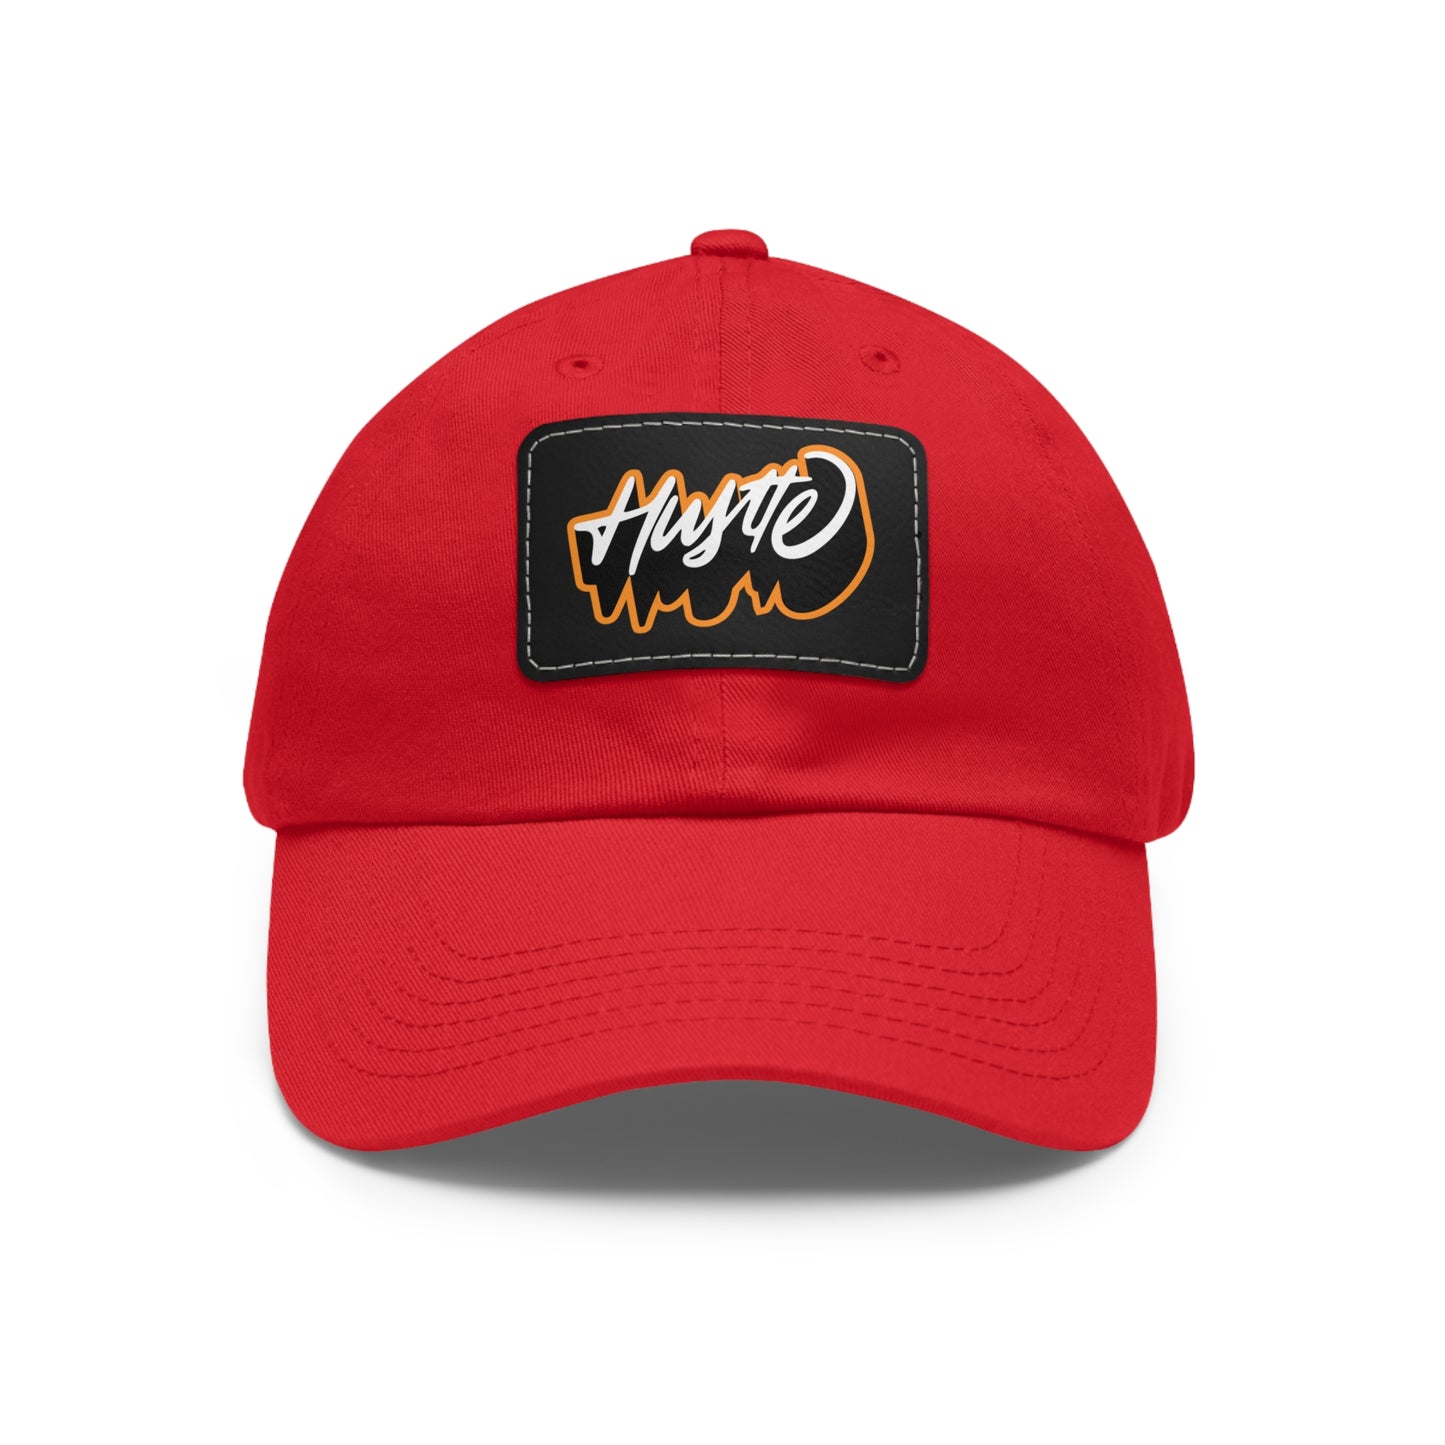 Graphic design(Hustle) Hat with Leather Patch (Rectangle)